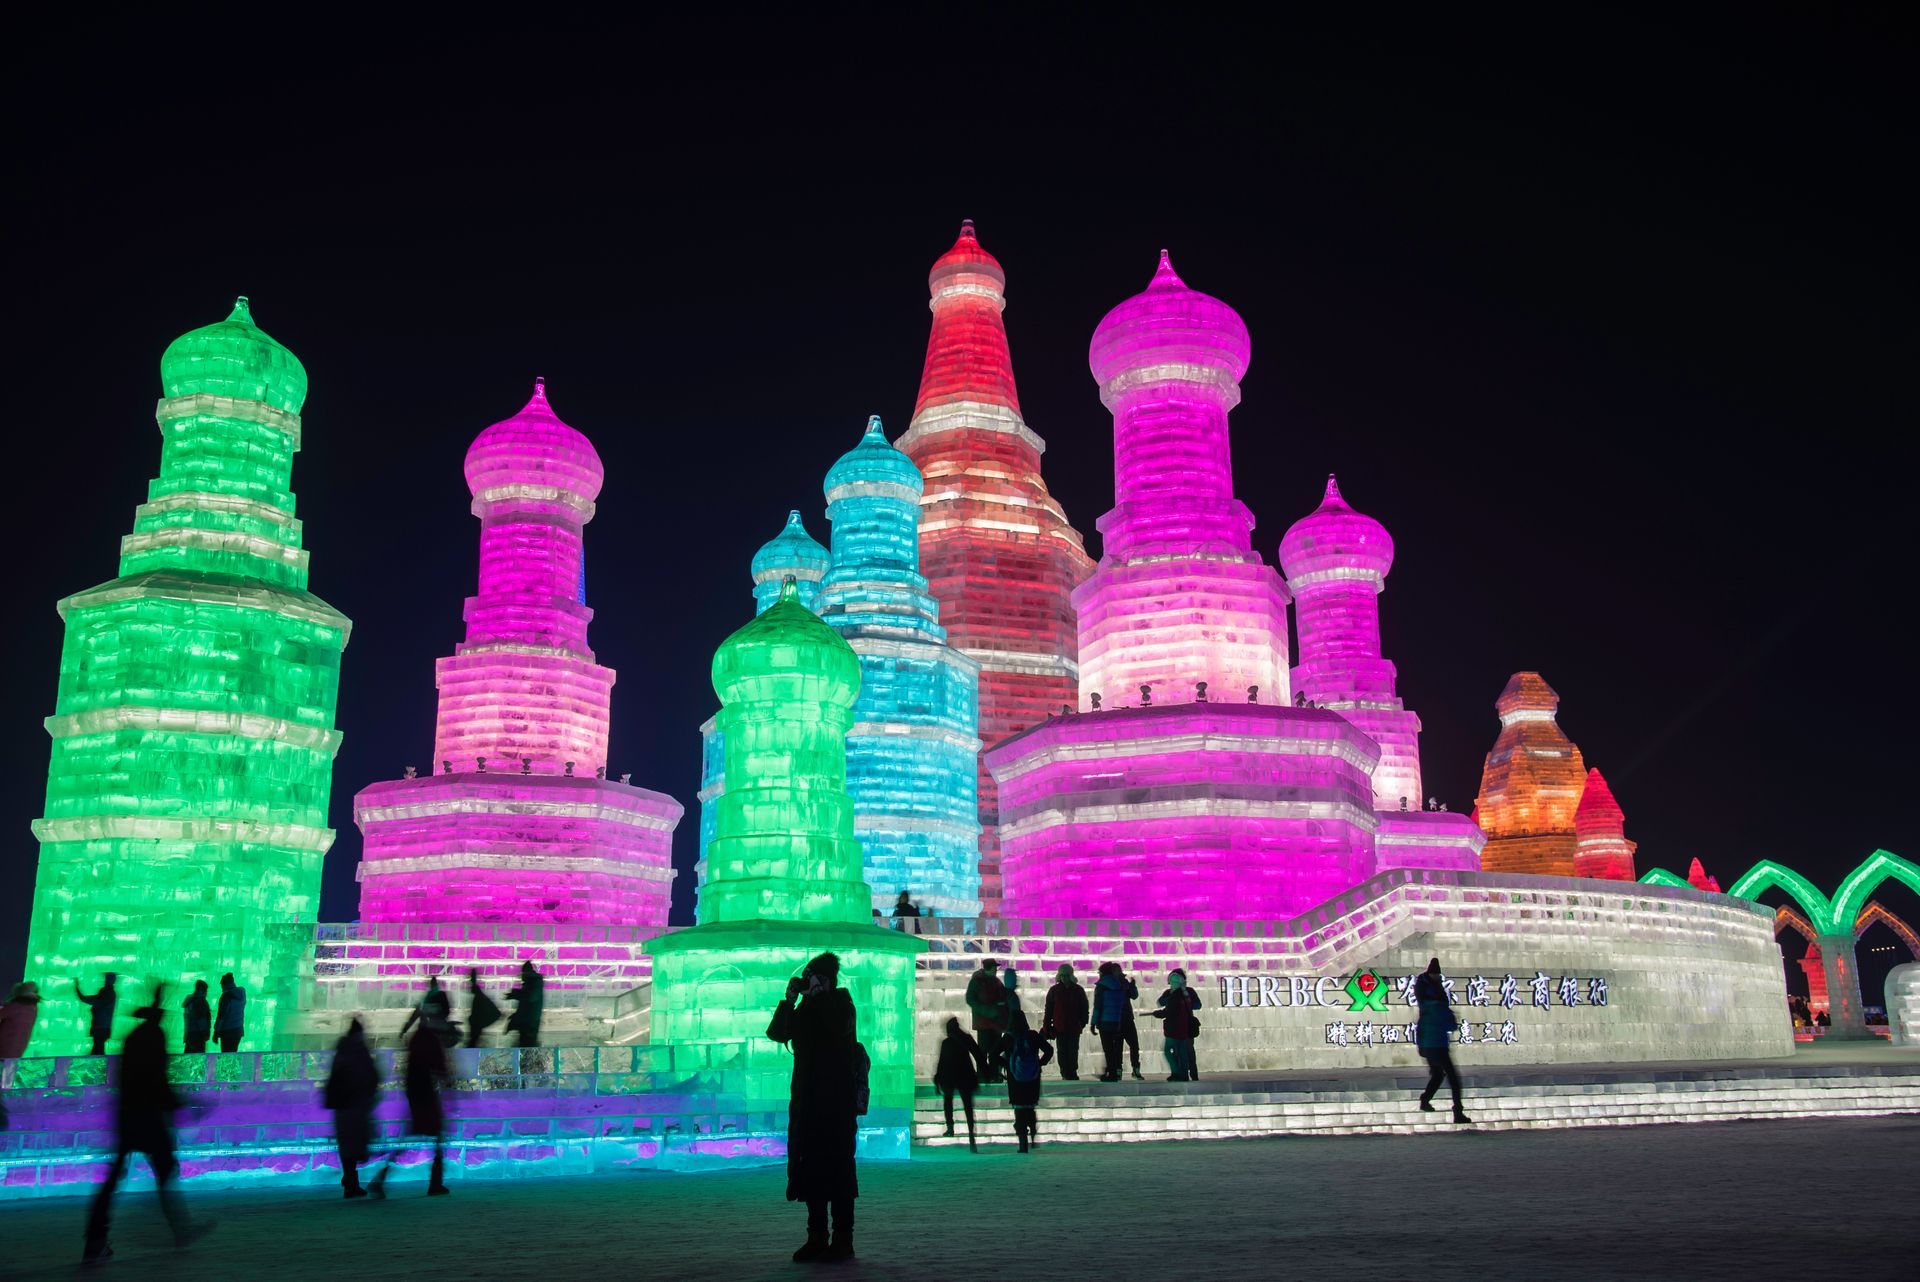 a large ice sculpture with chinese writing on it at Harbin International Ice and Snow Sculpture Festival